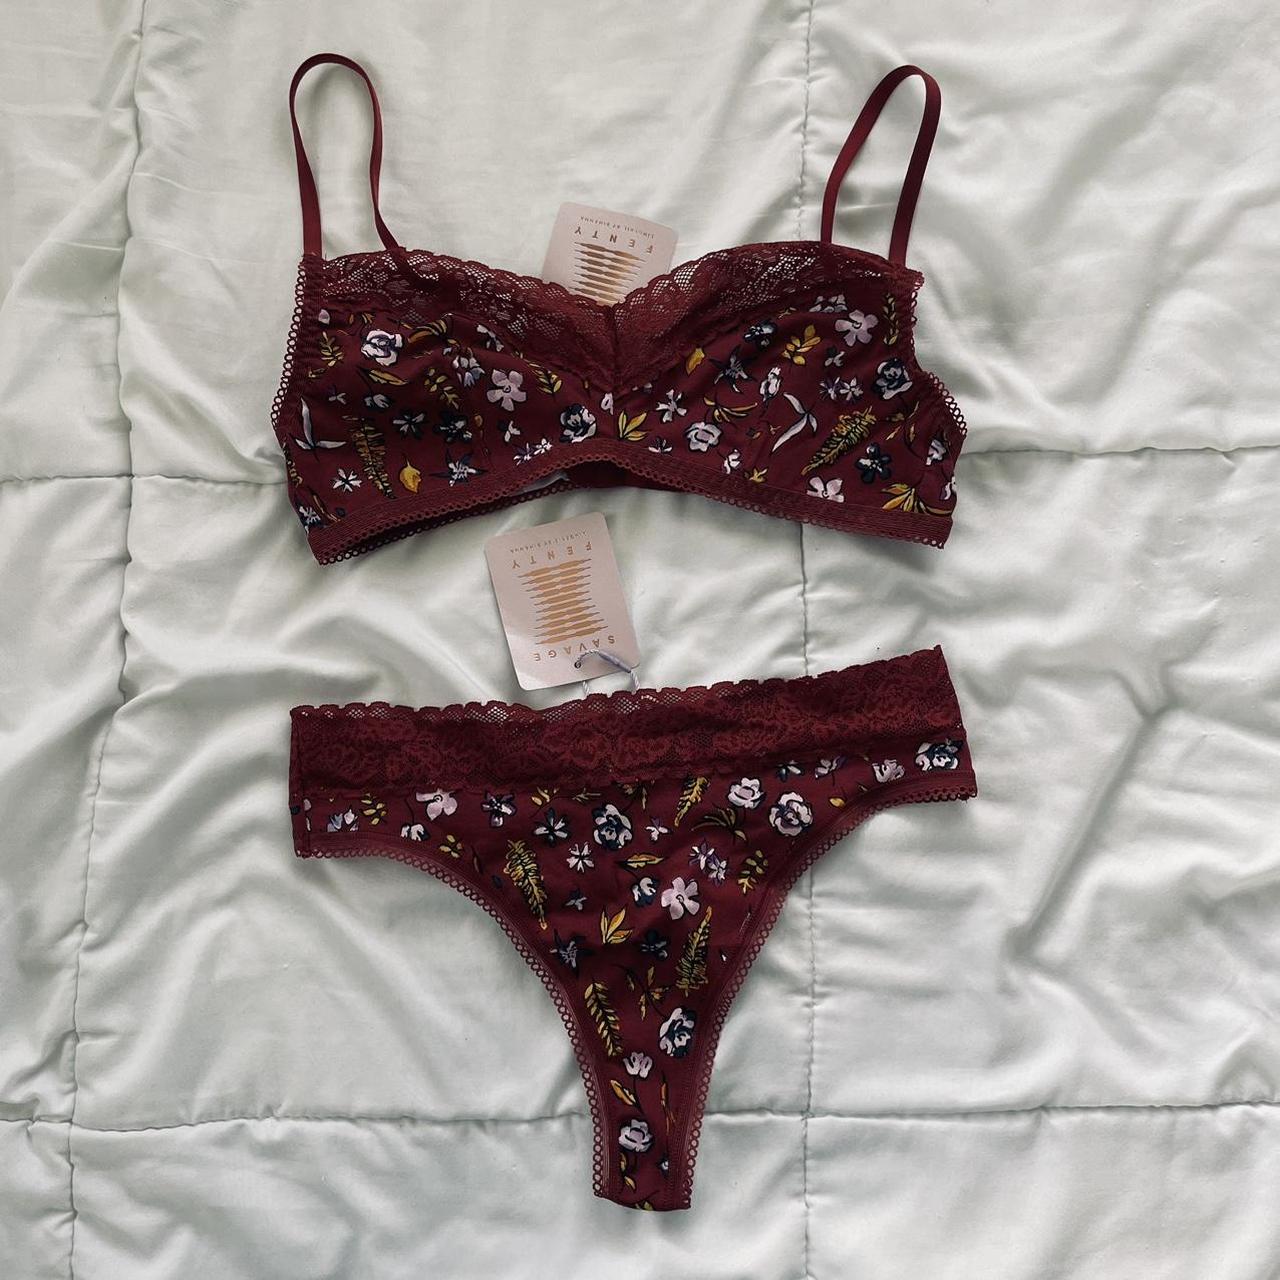 Savage x Fenty Mosaic Embroidery lace half-cup bra in red